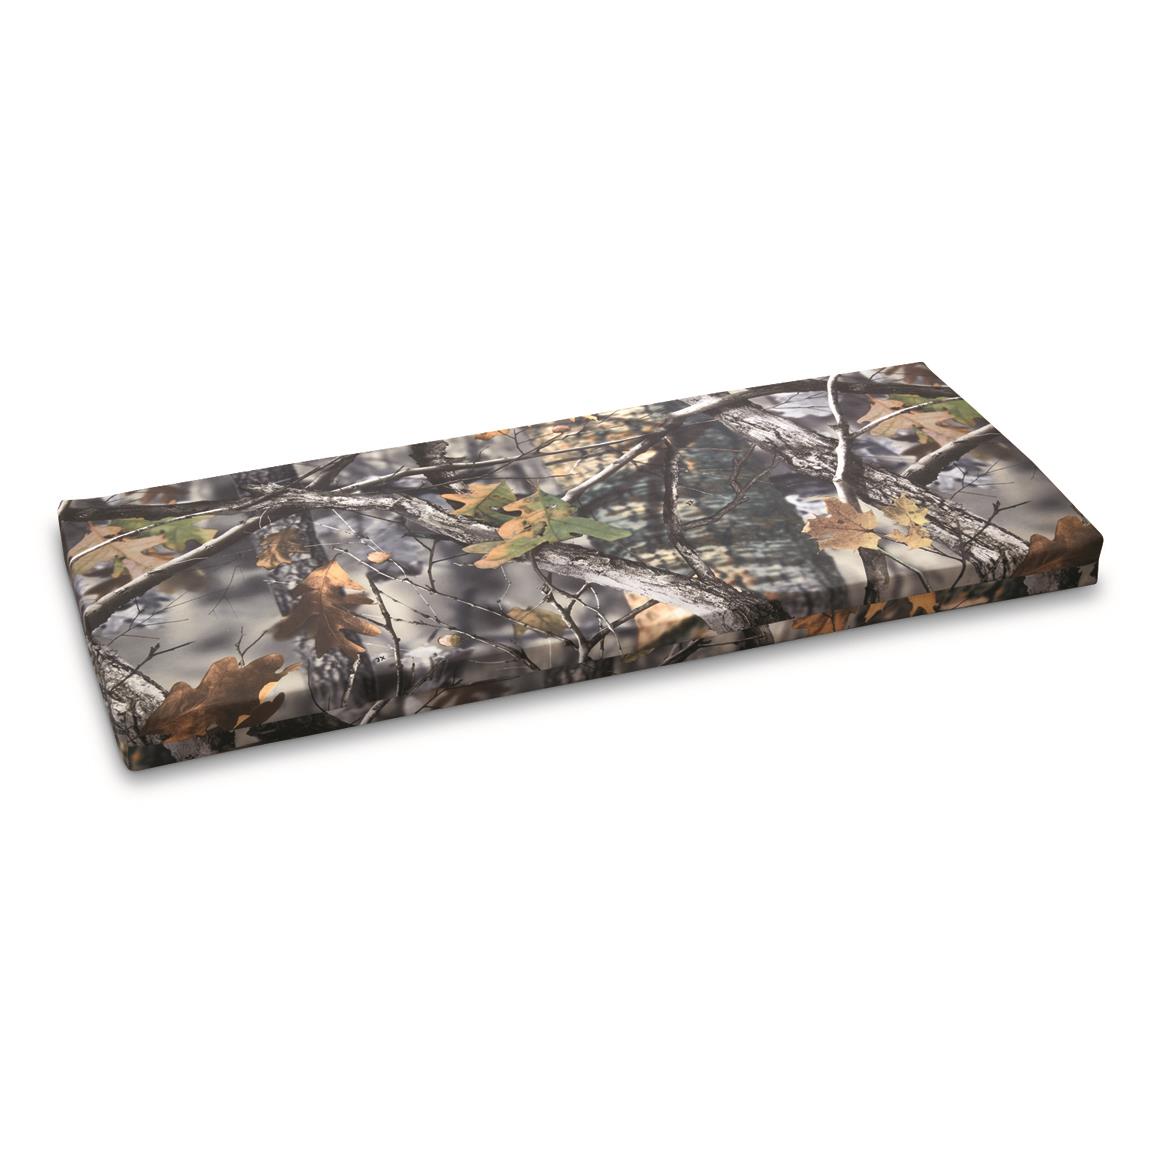 Muddy Complete Seat Hunting Blind Treestand Fishing Seat Cushion Camp CAMO 